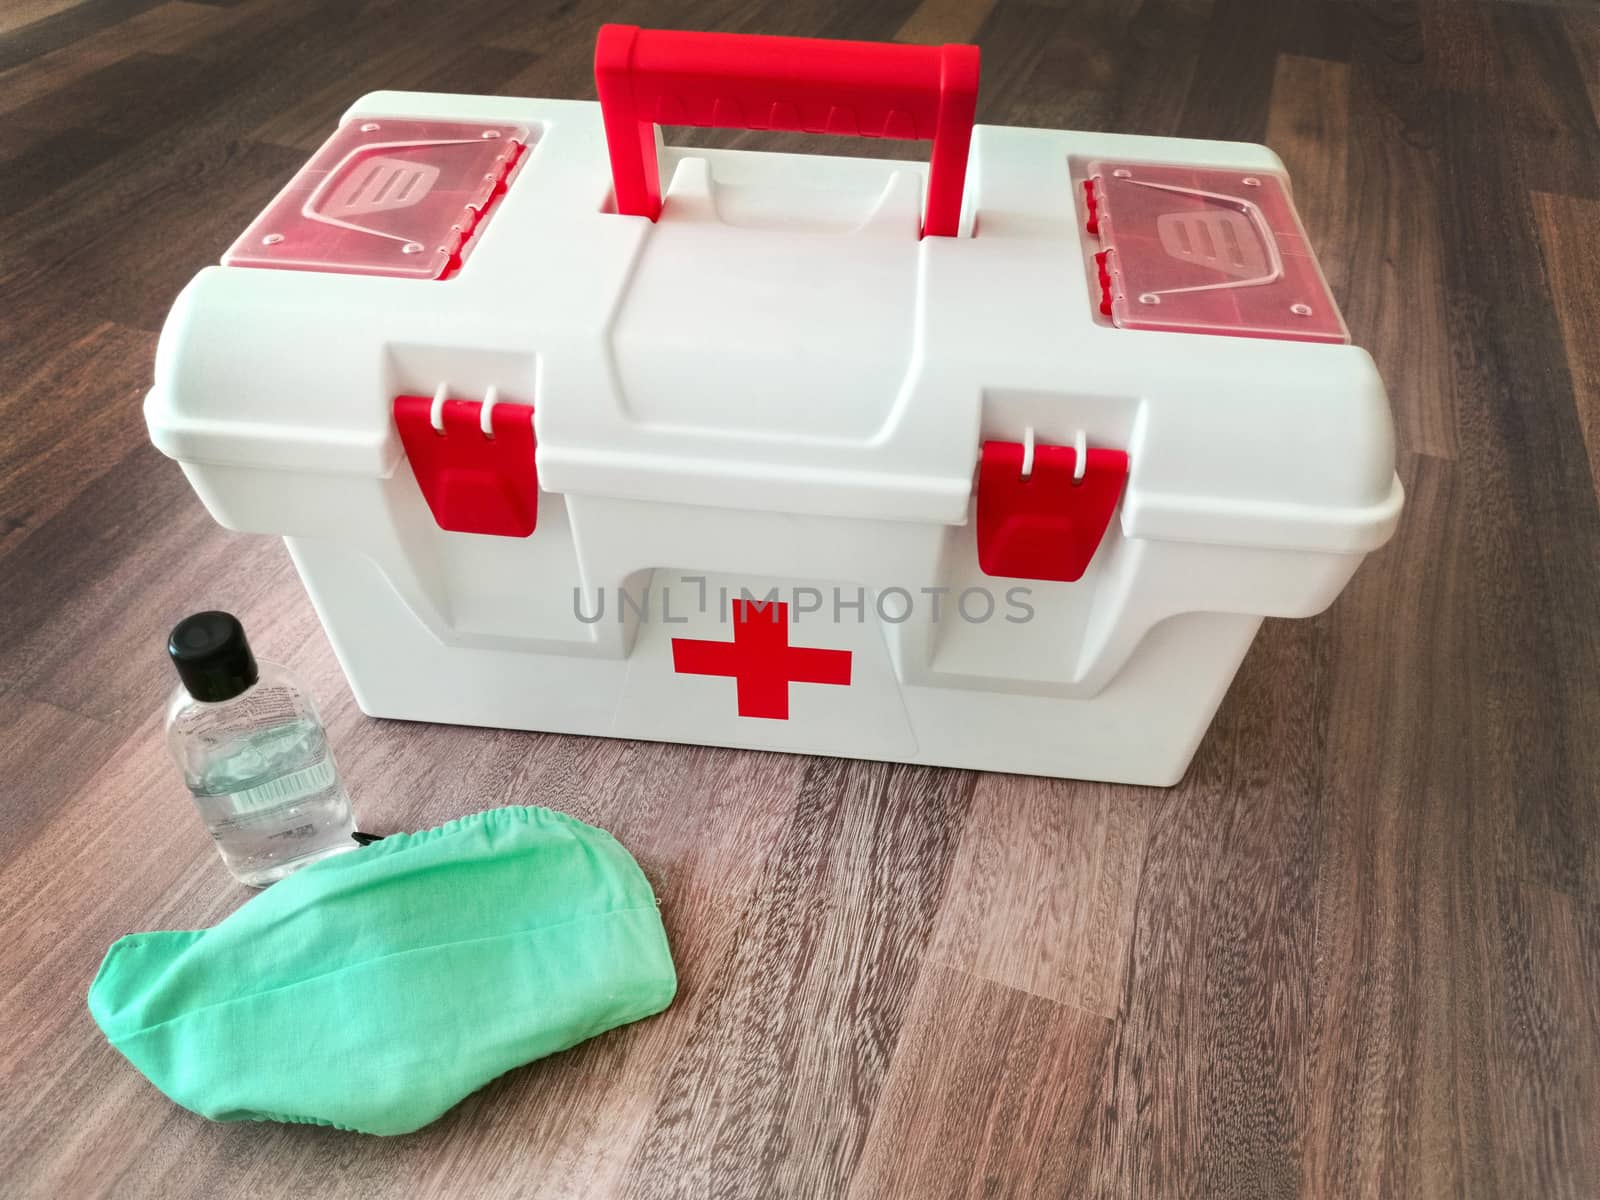 Prevention of the flu virus home first aid kit with a protective face mask and hand sanitizer .Texture or background